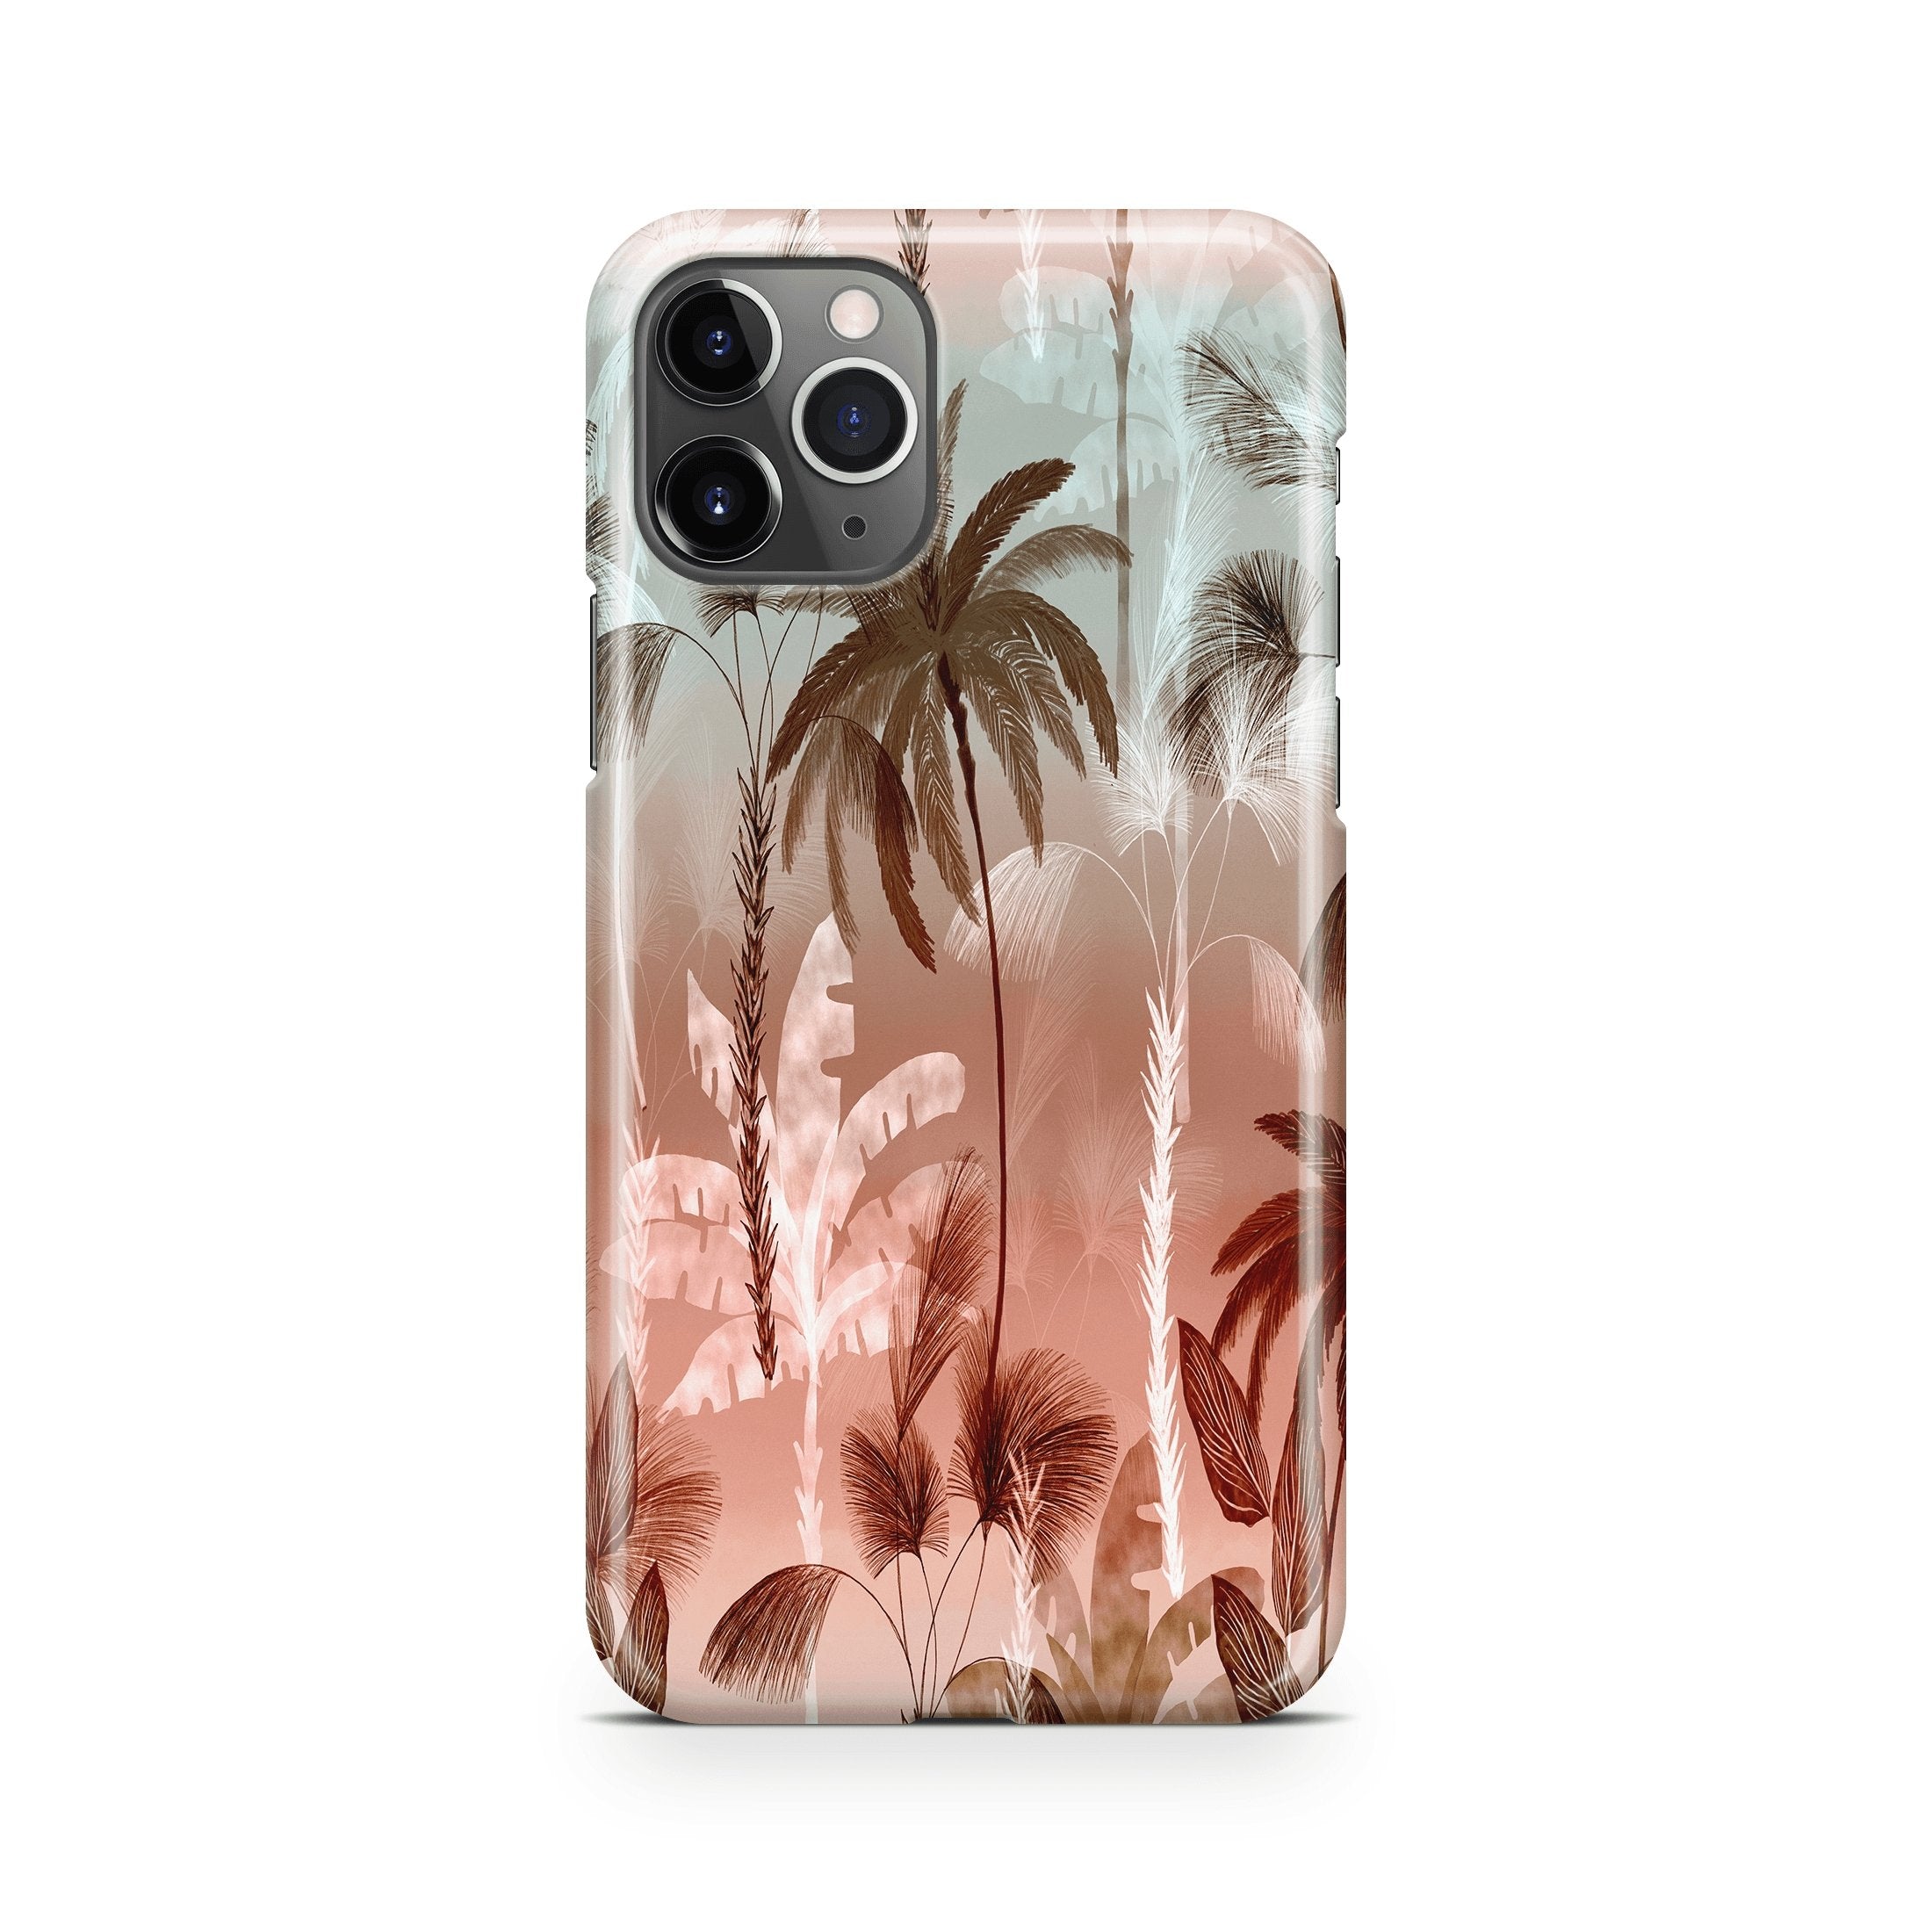 Sunset Tropical - iPhone phone case designs by CaseSwagger